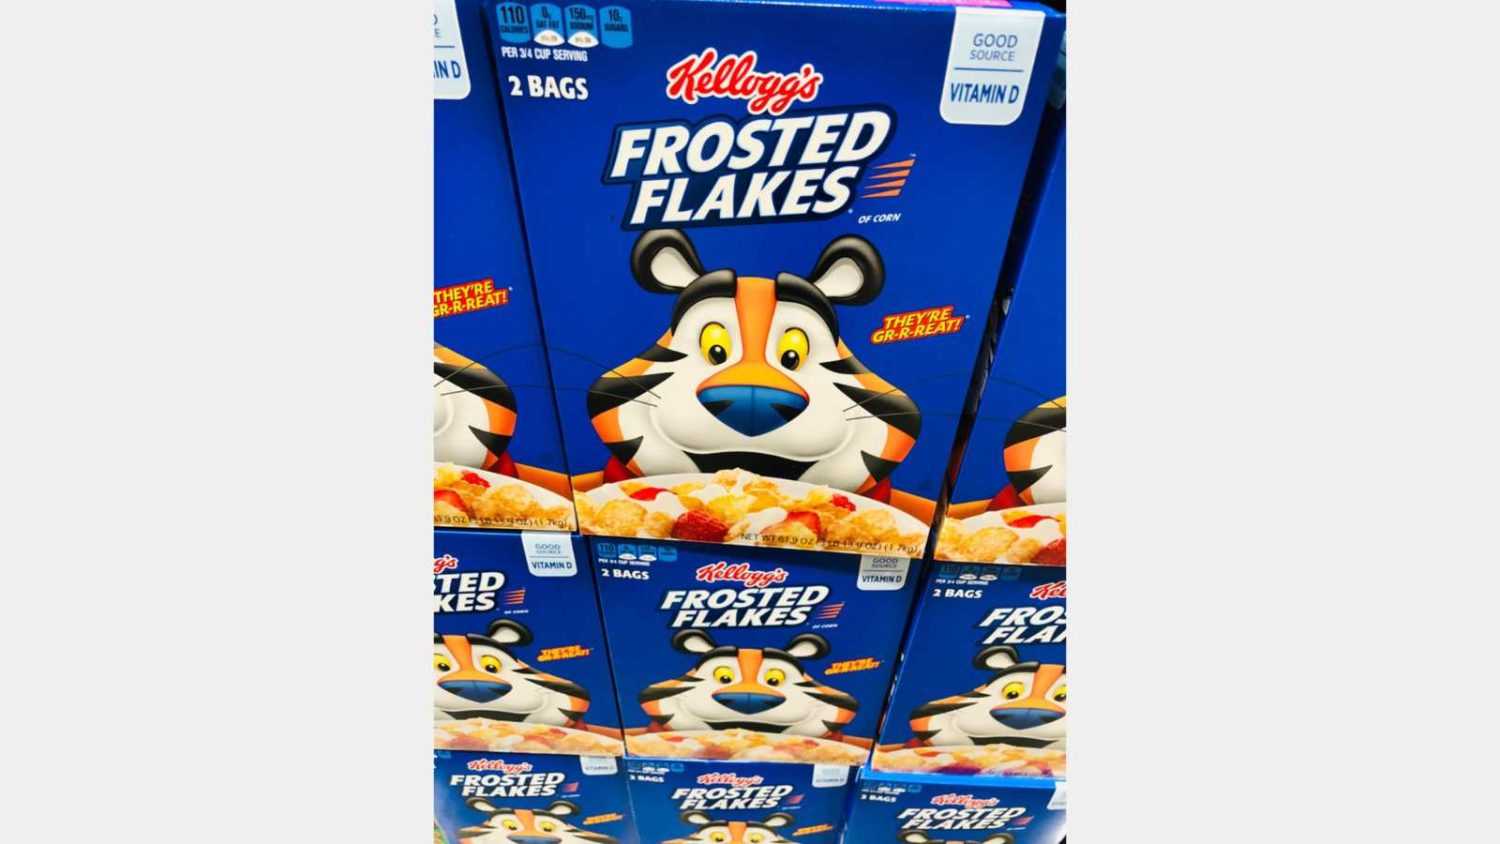 Kellog's frosted flakes